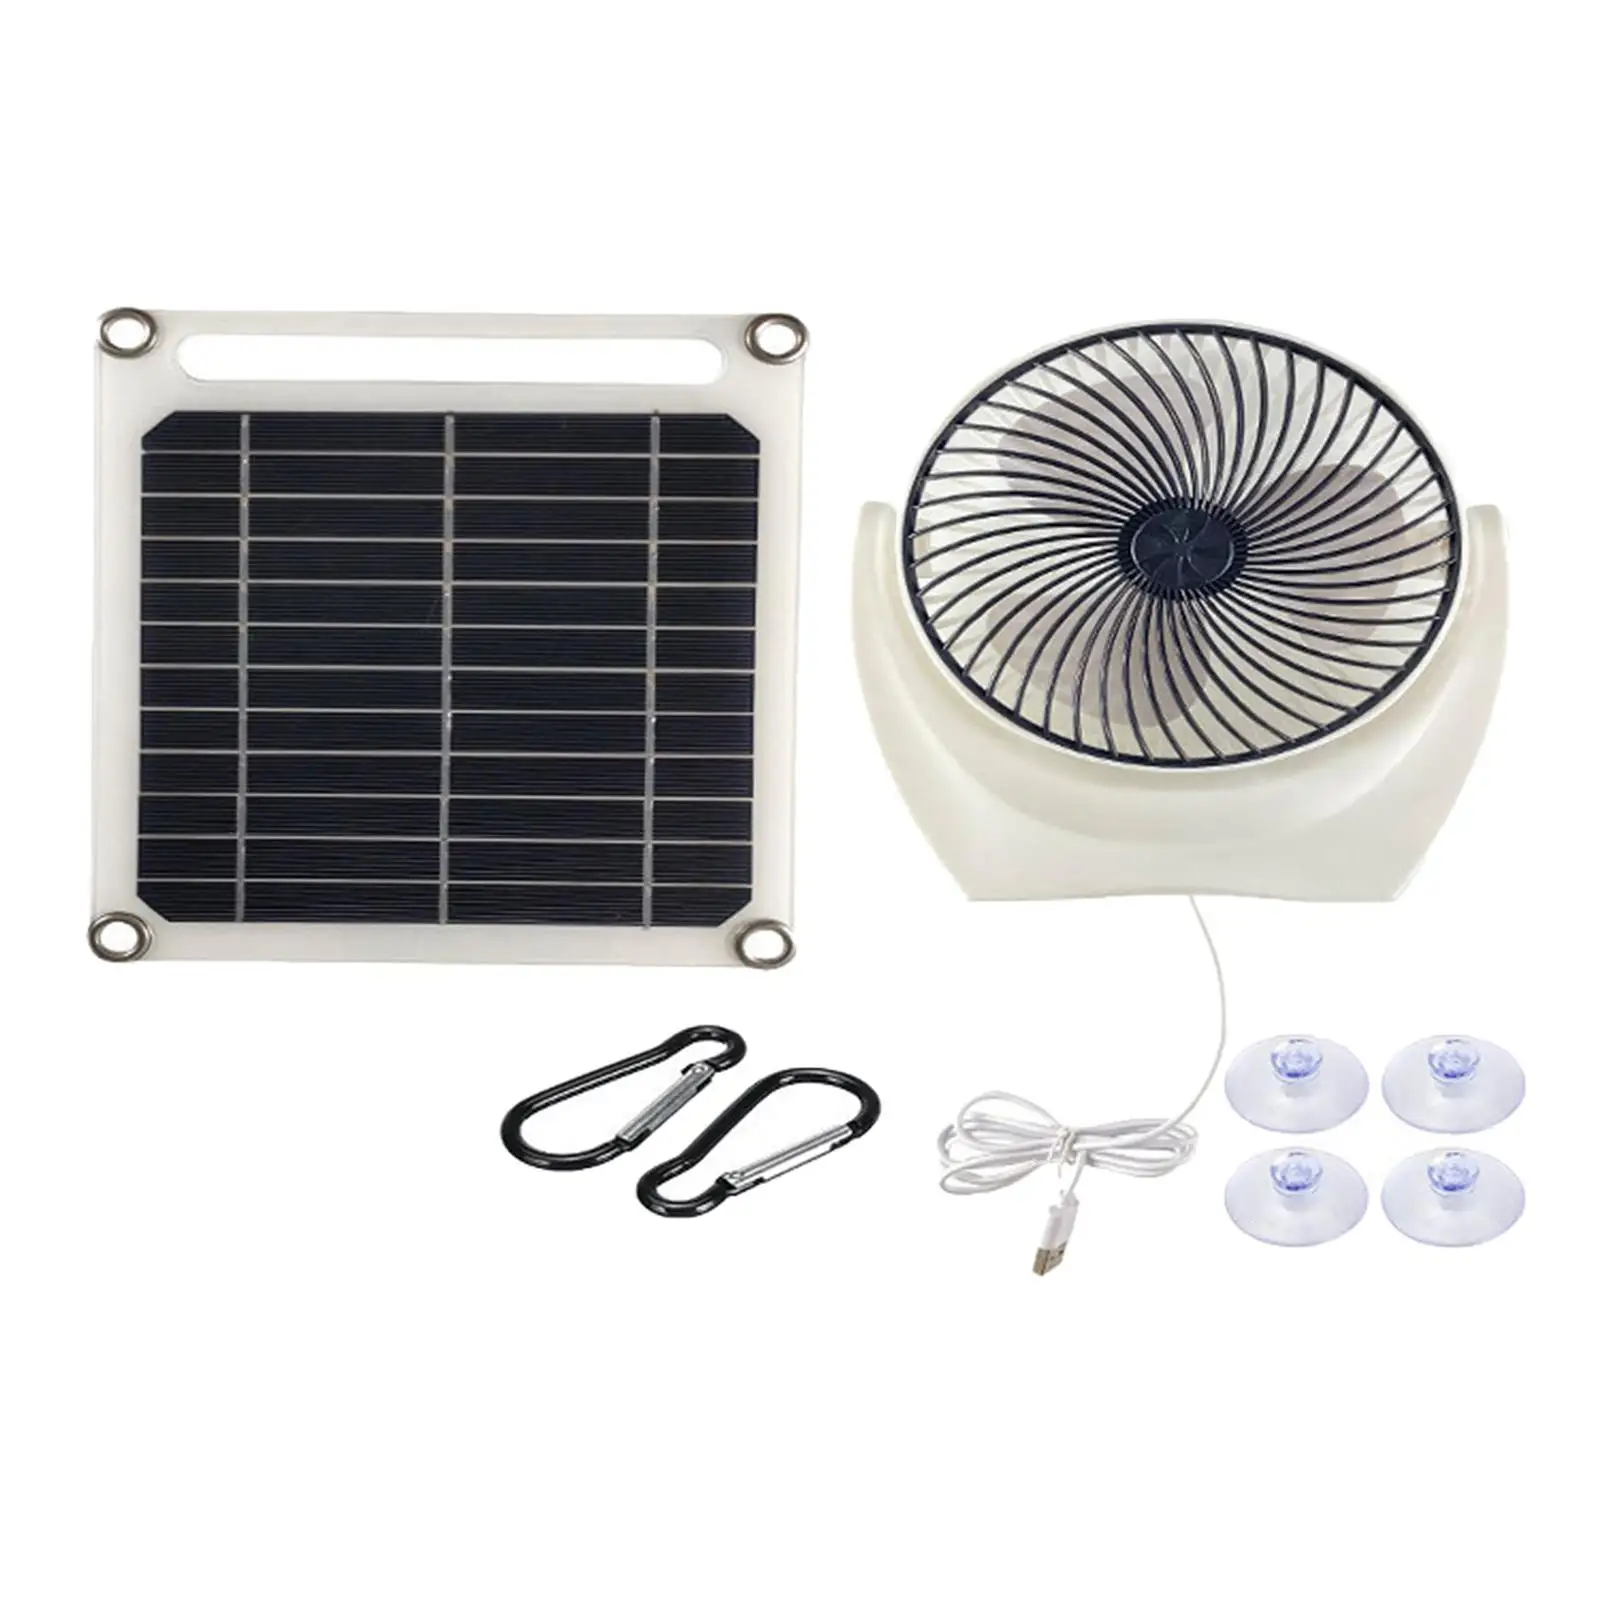 Solar Fan Greenhouse Fan ,Small Ventilator Air Extractor for Picnic, Office, Fishing,